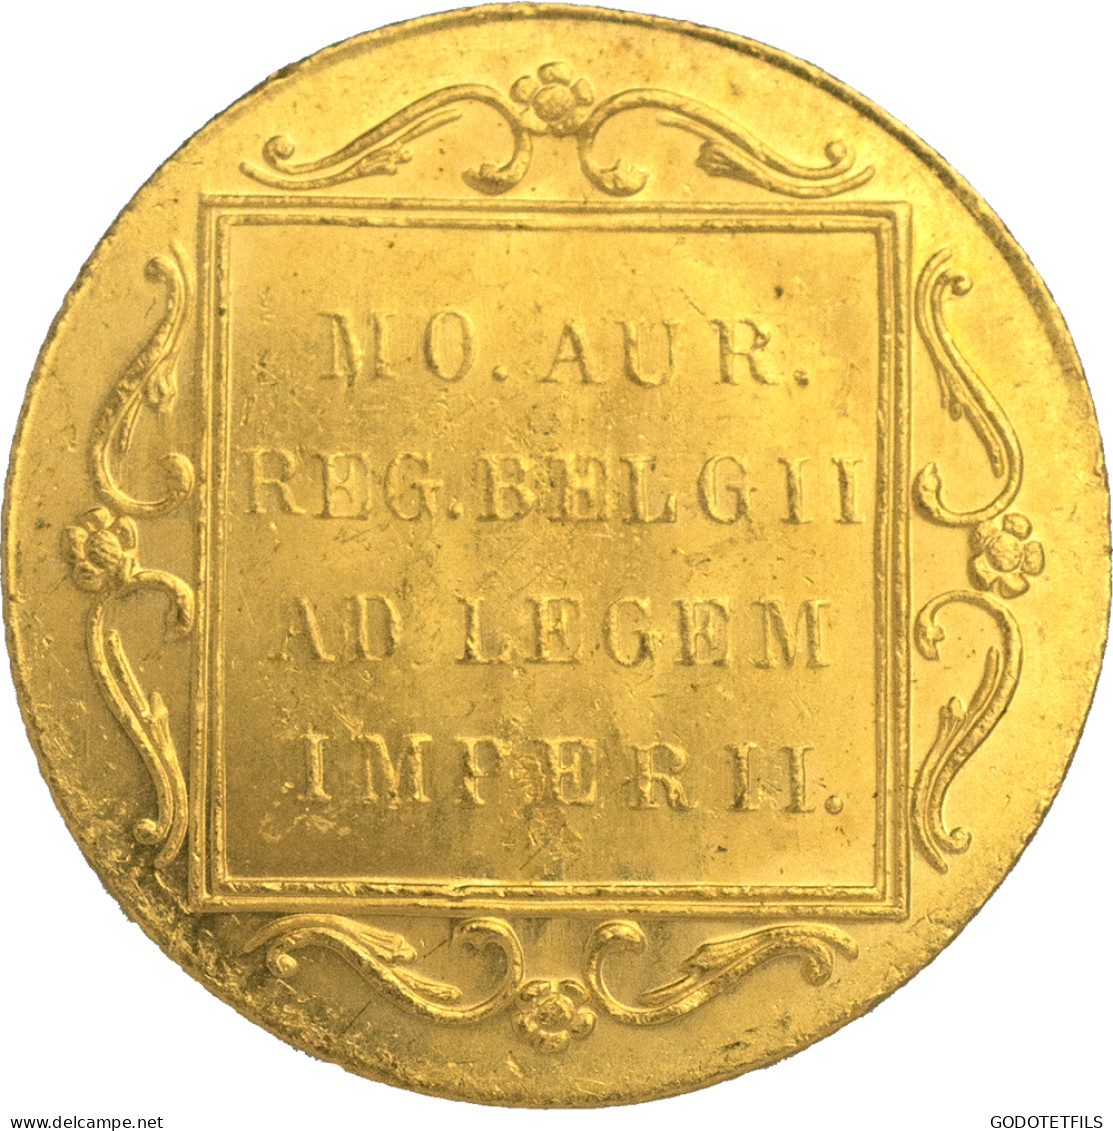 Pays-Bas- Ducat Au Chevalier 1928 Utrecht - Gold And Silver Coins